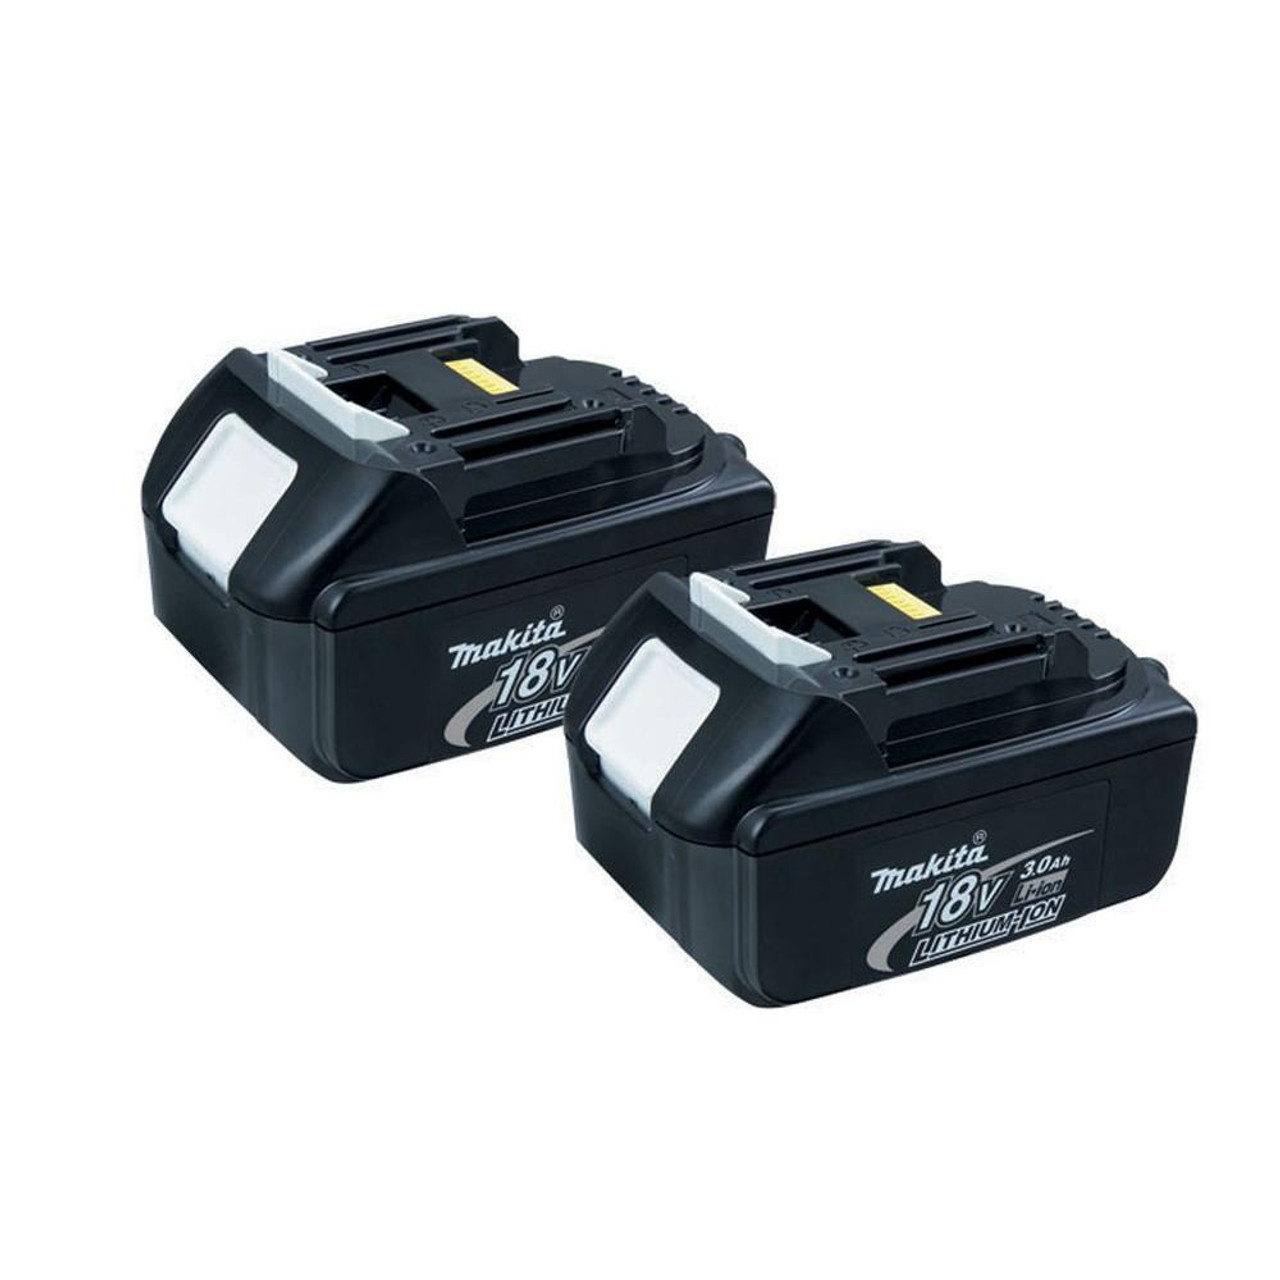 Makita 18V LXT Lithium-Ion High Capacity Battery Pack 3.0Ah with